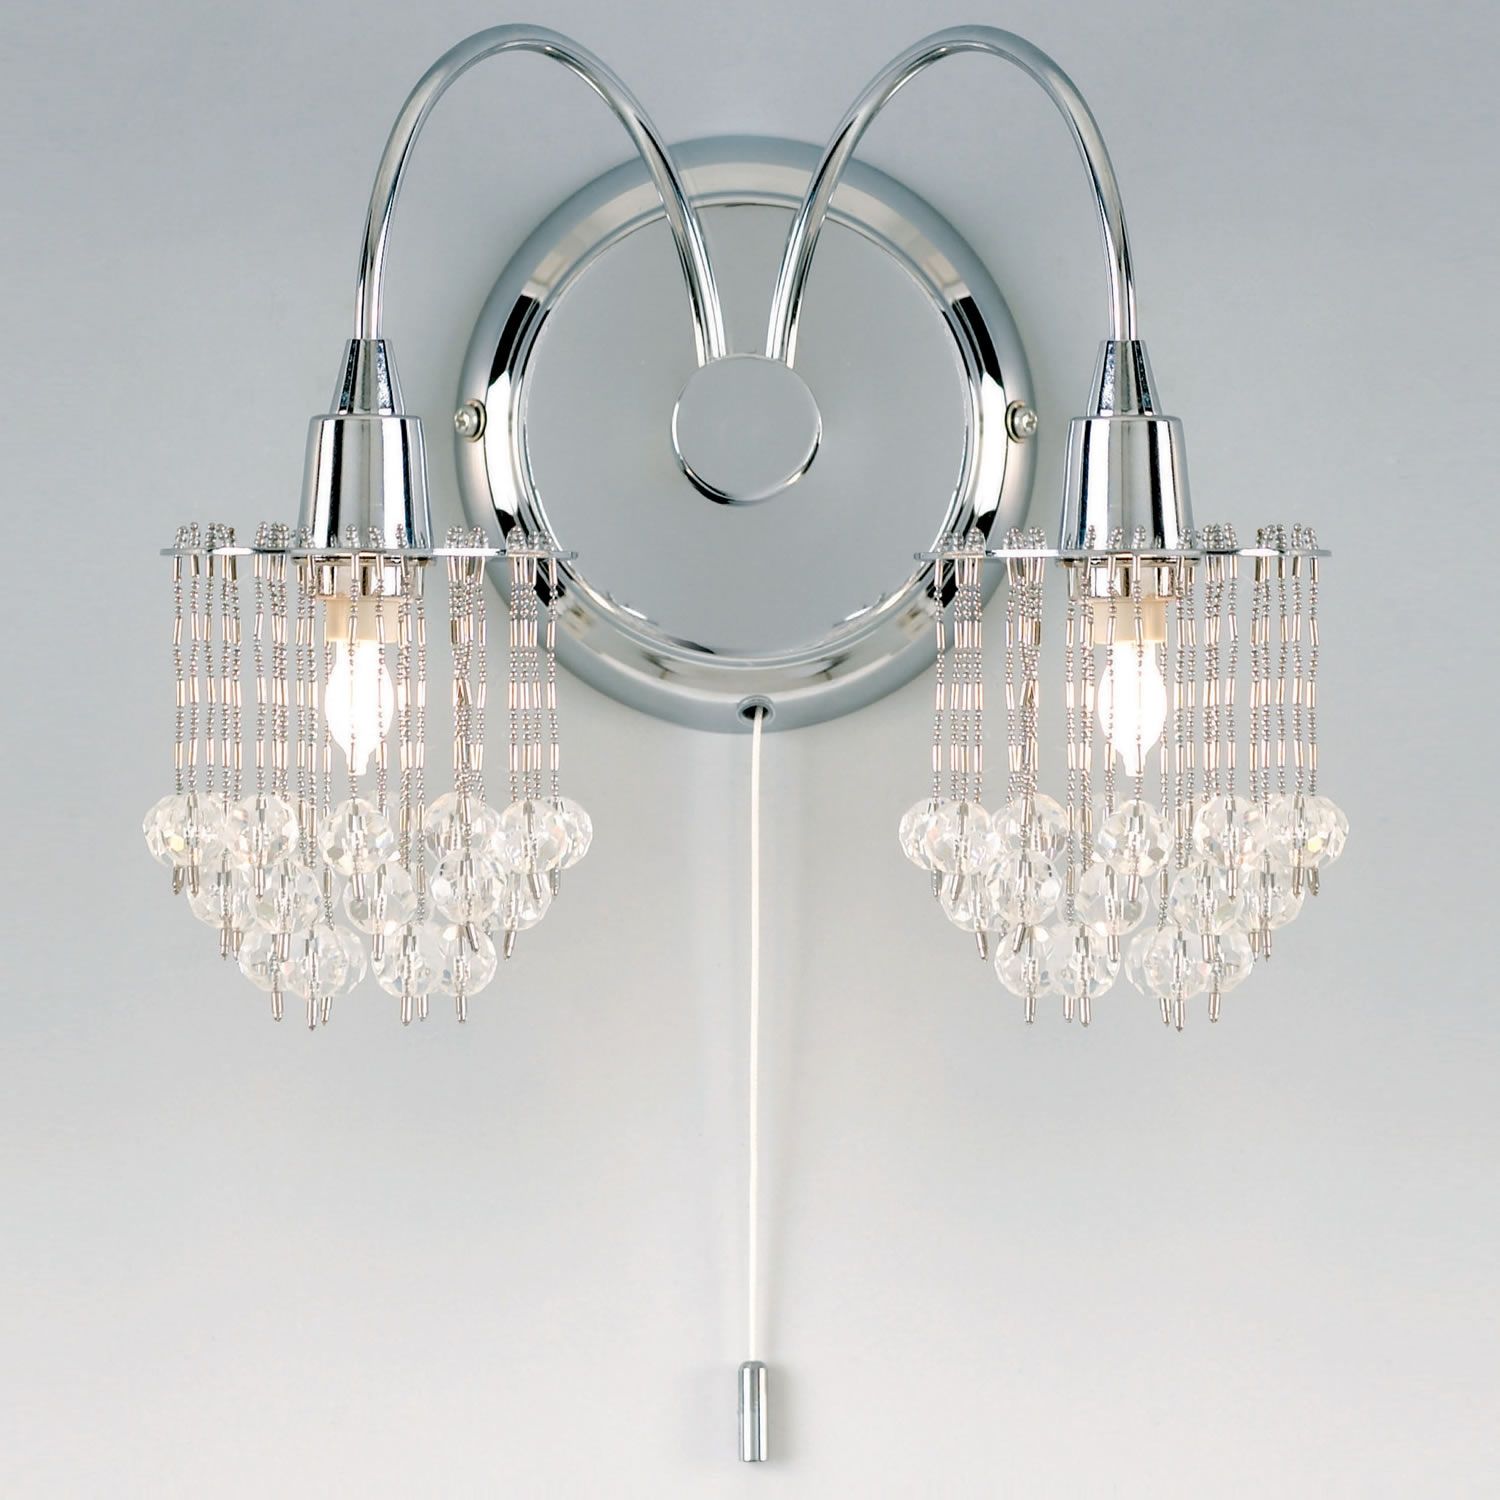 Chandelier Chandelier Wall Light Sensational Photos Inspirations With Regard To Chandelier Wall Lights (Photo 5 of 12)